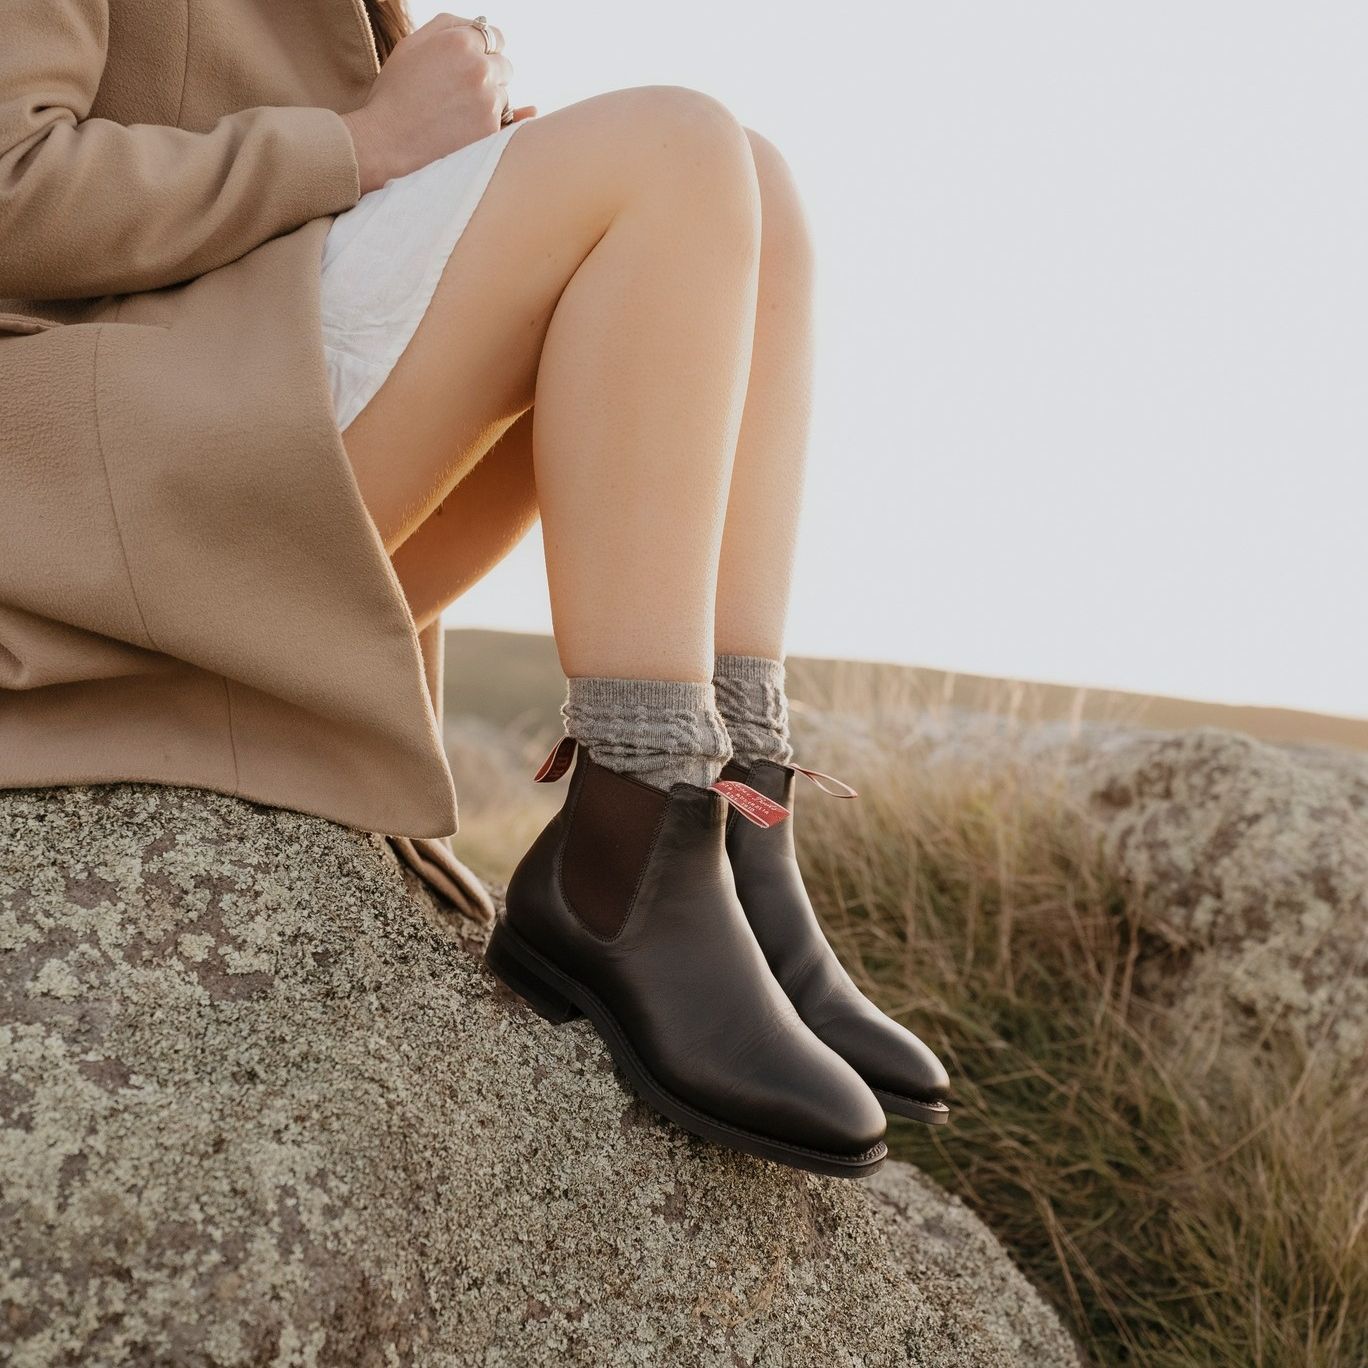 The Kidman | An all year round boot

Perfect for pretty much any situation yo...

Shop the Kidman Range via the link in bio. 

#RossiBoots